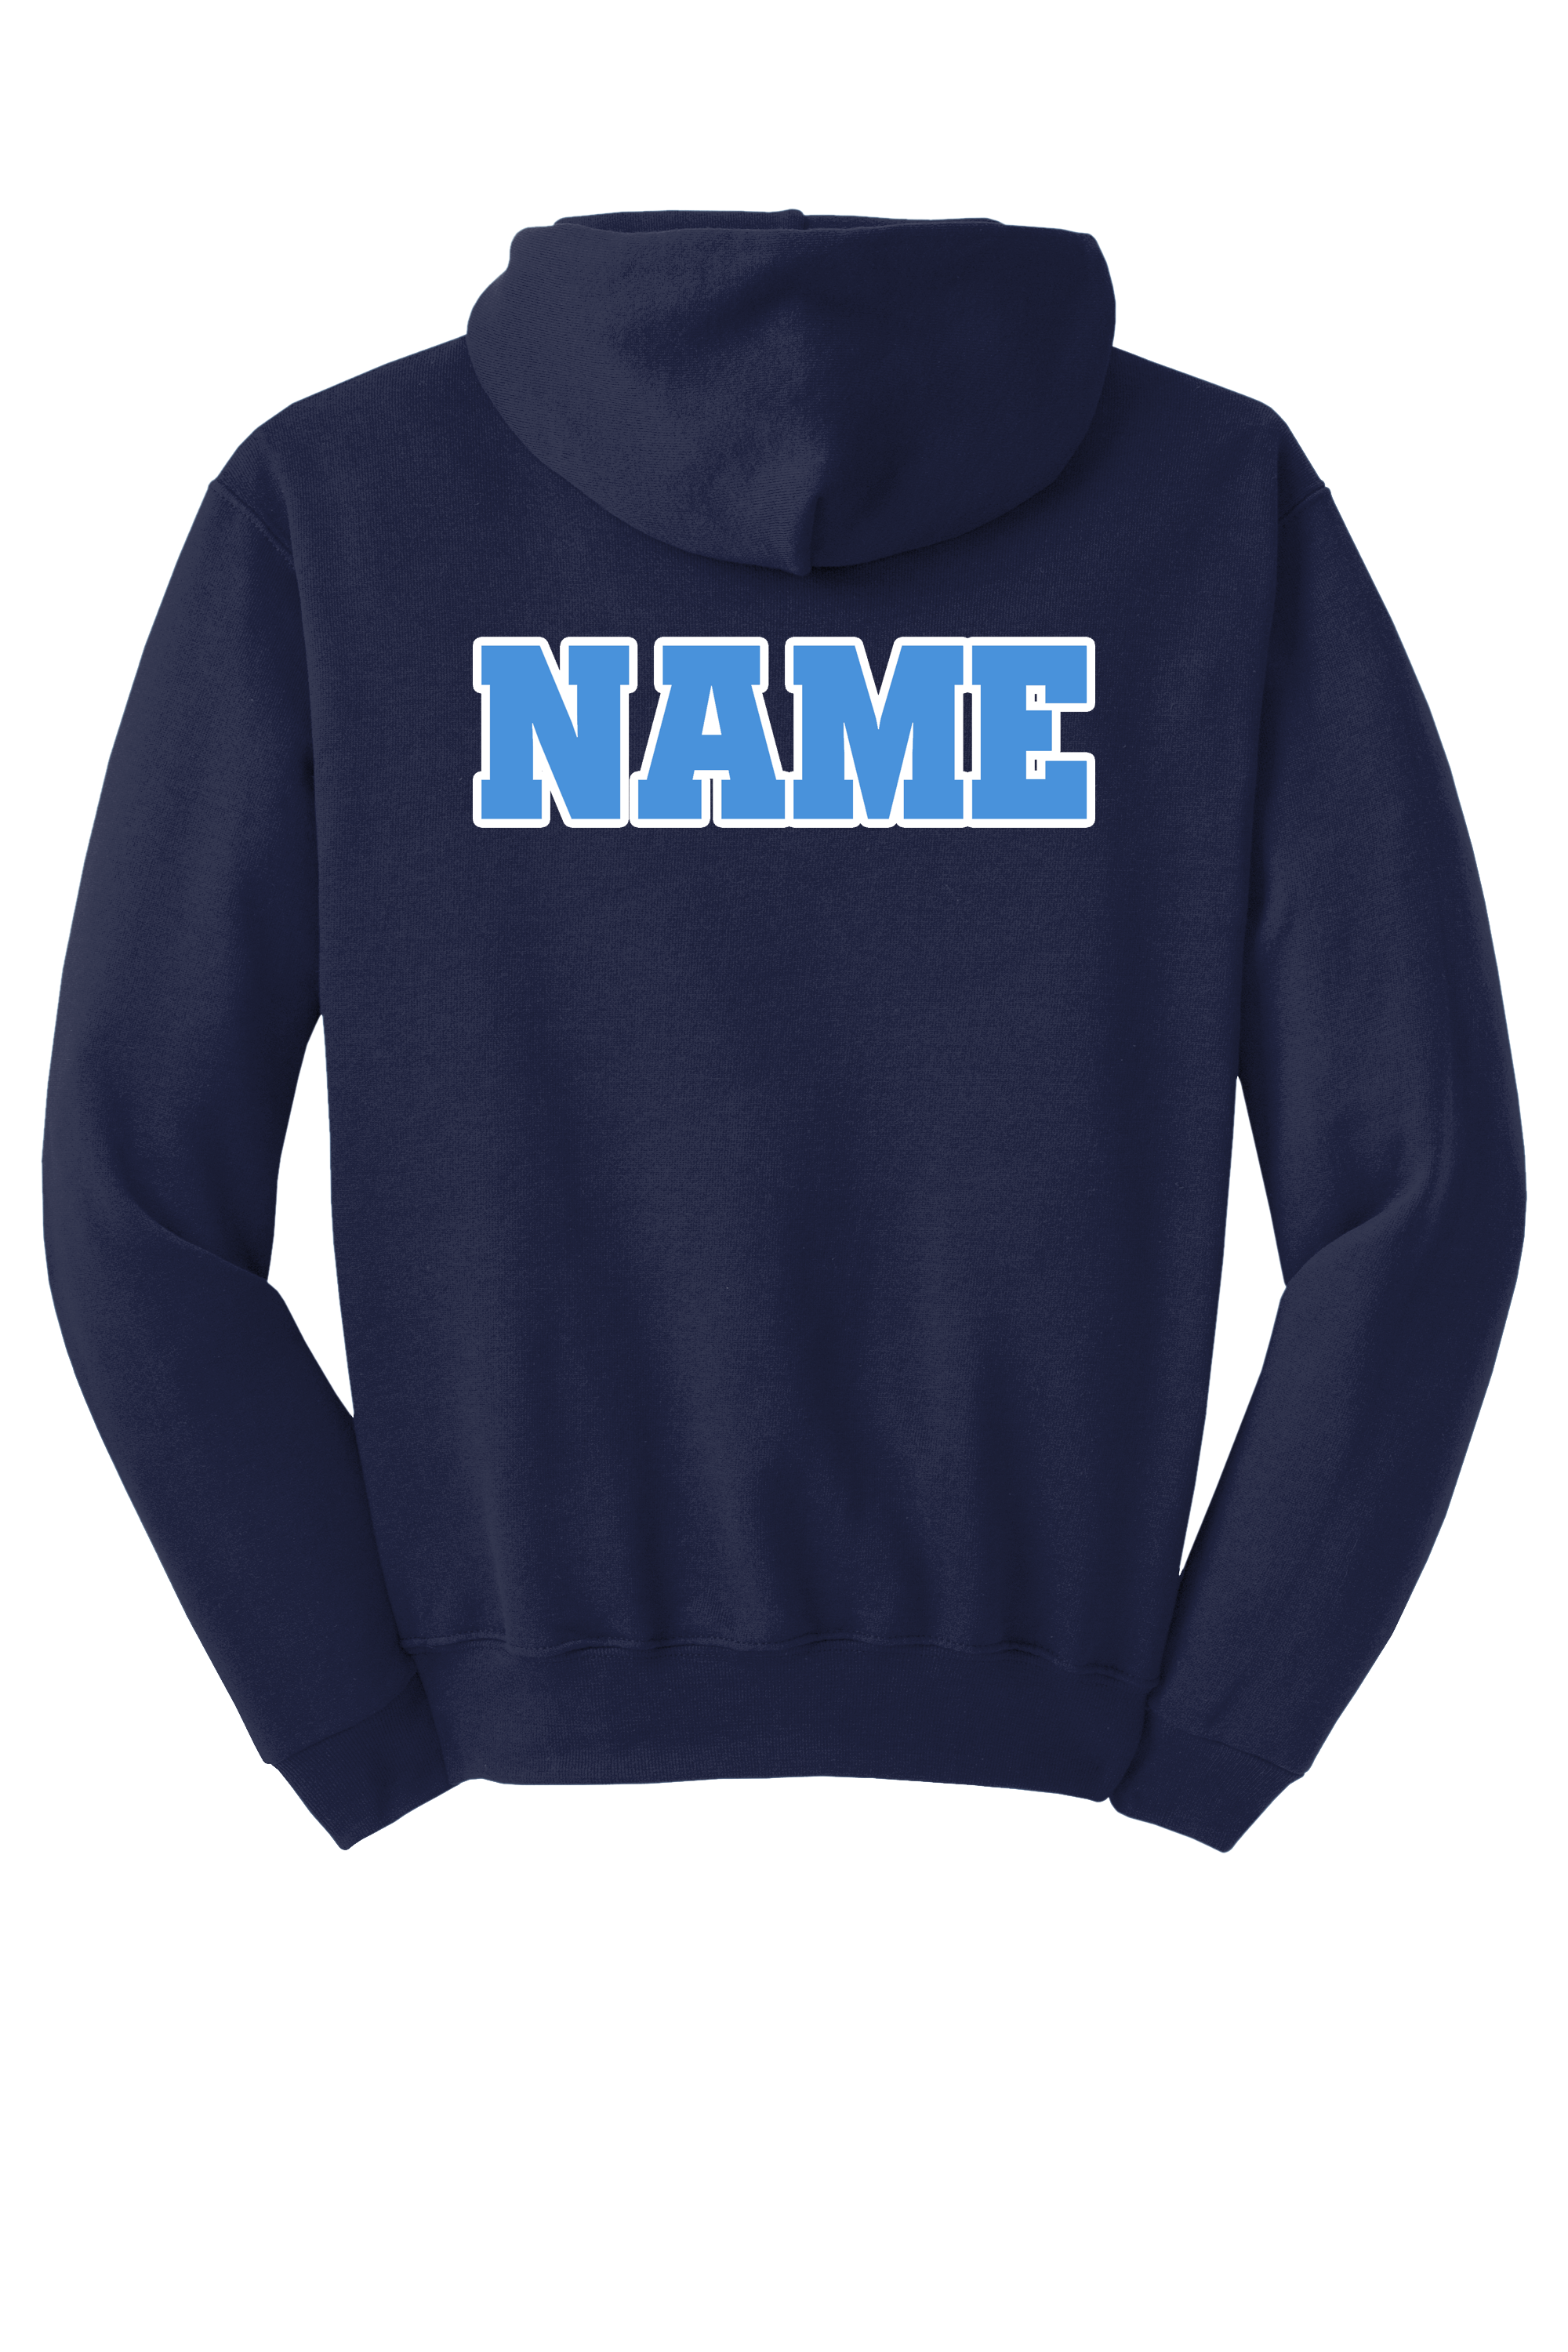 Hooded Sweatshirt (with or without name)